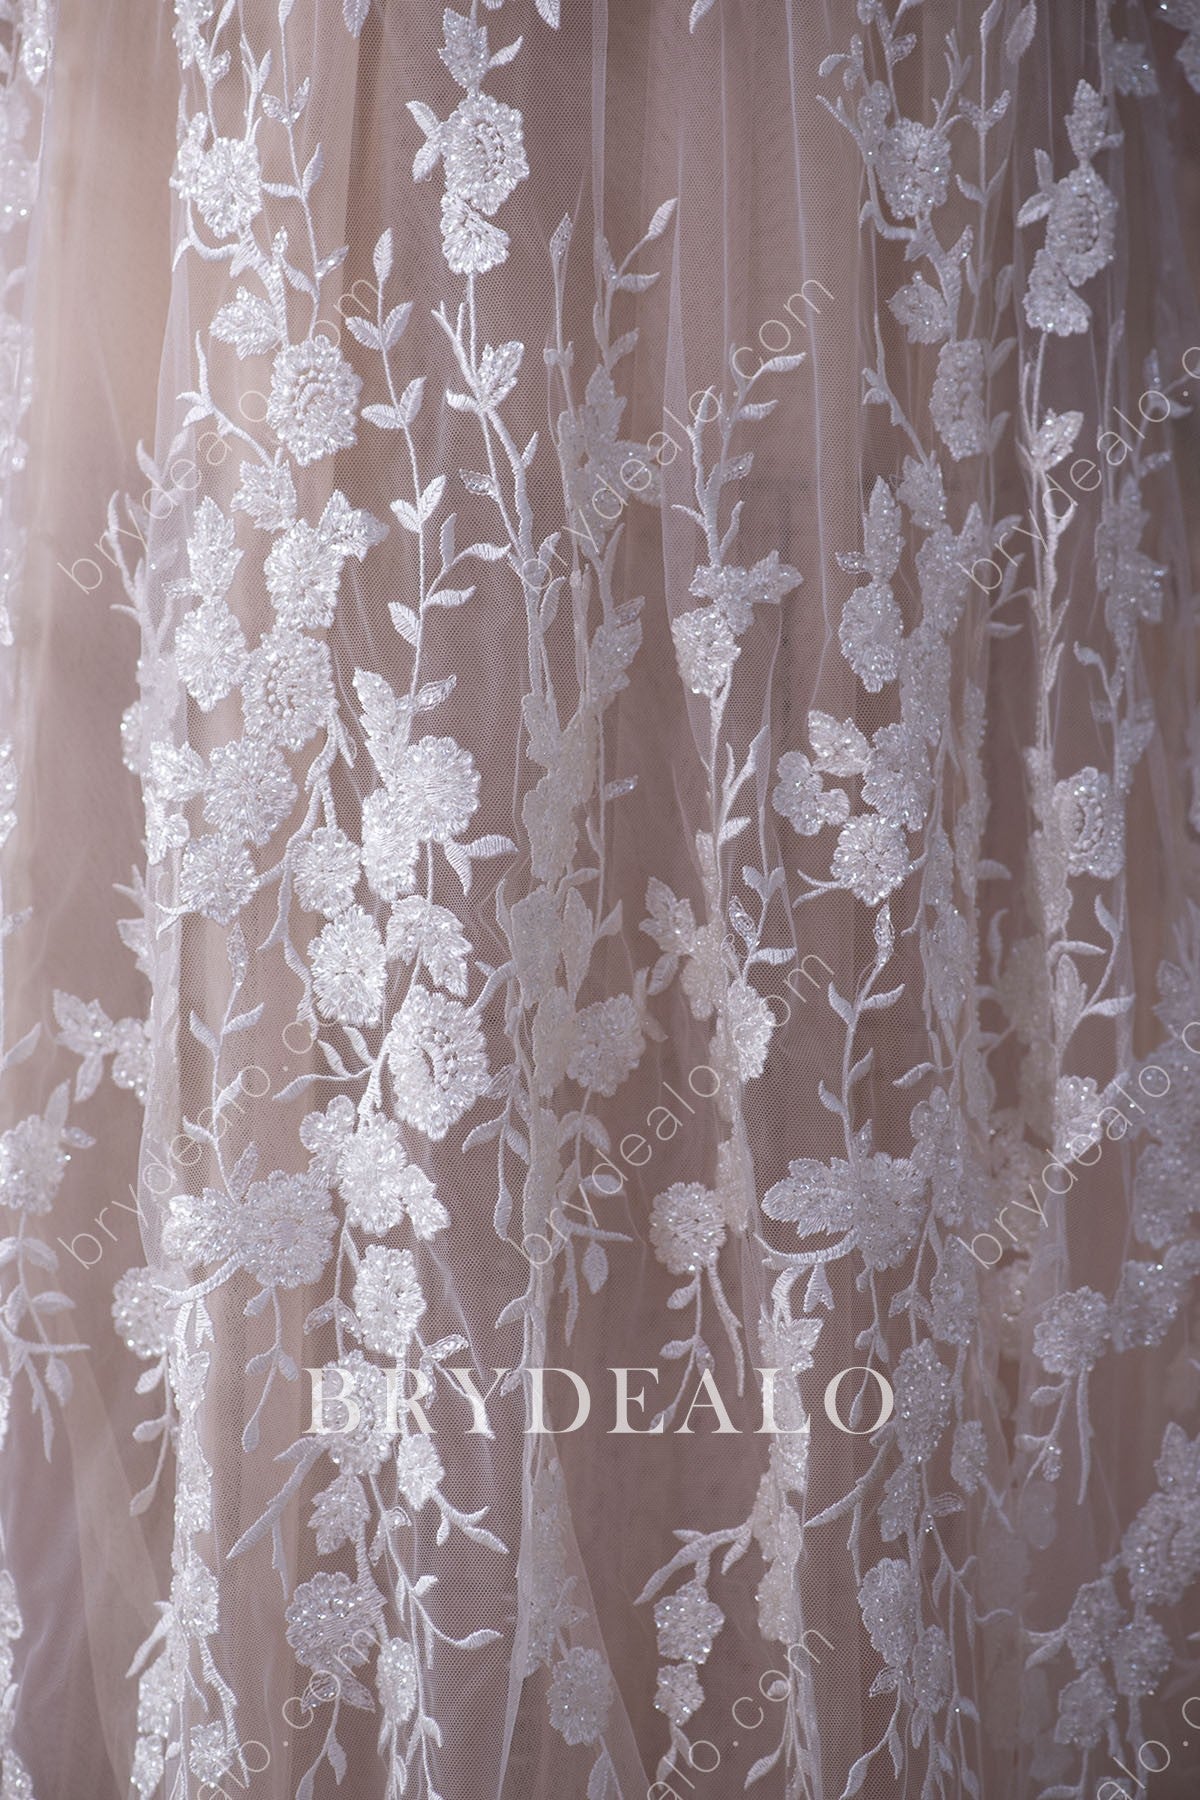 Best Beaded Floral Leafy Bridal Lace Fabric online